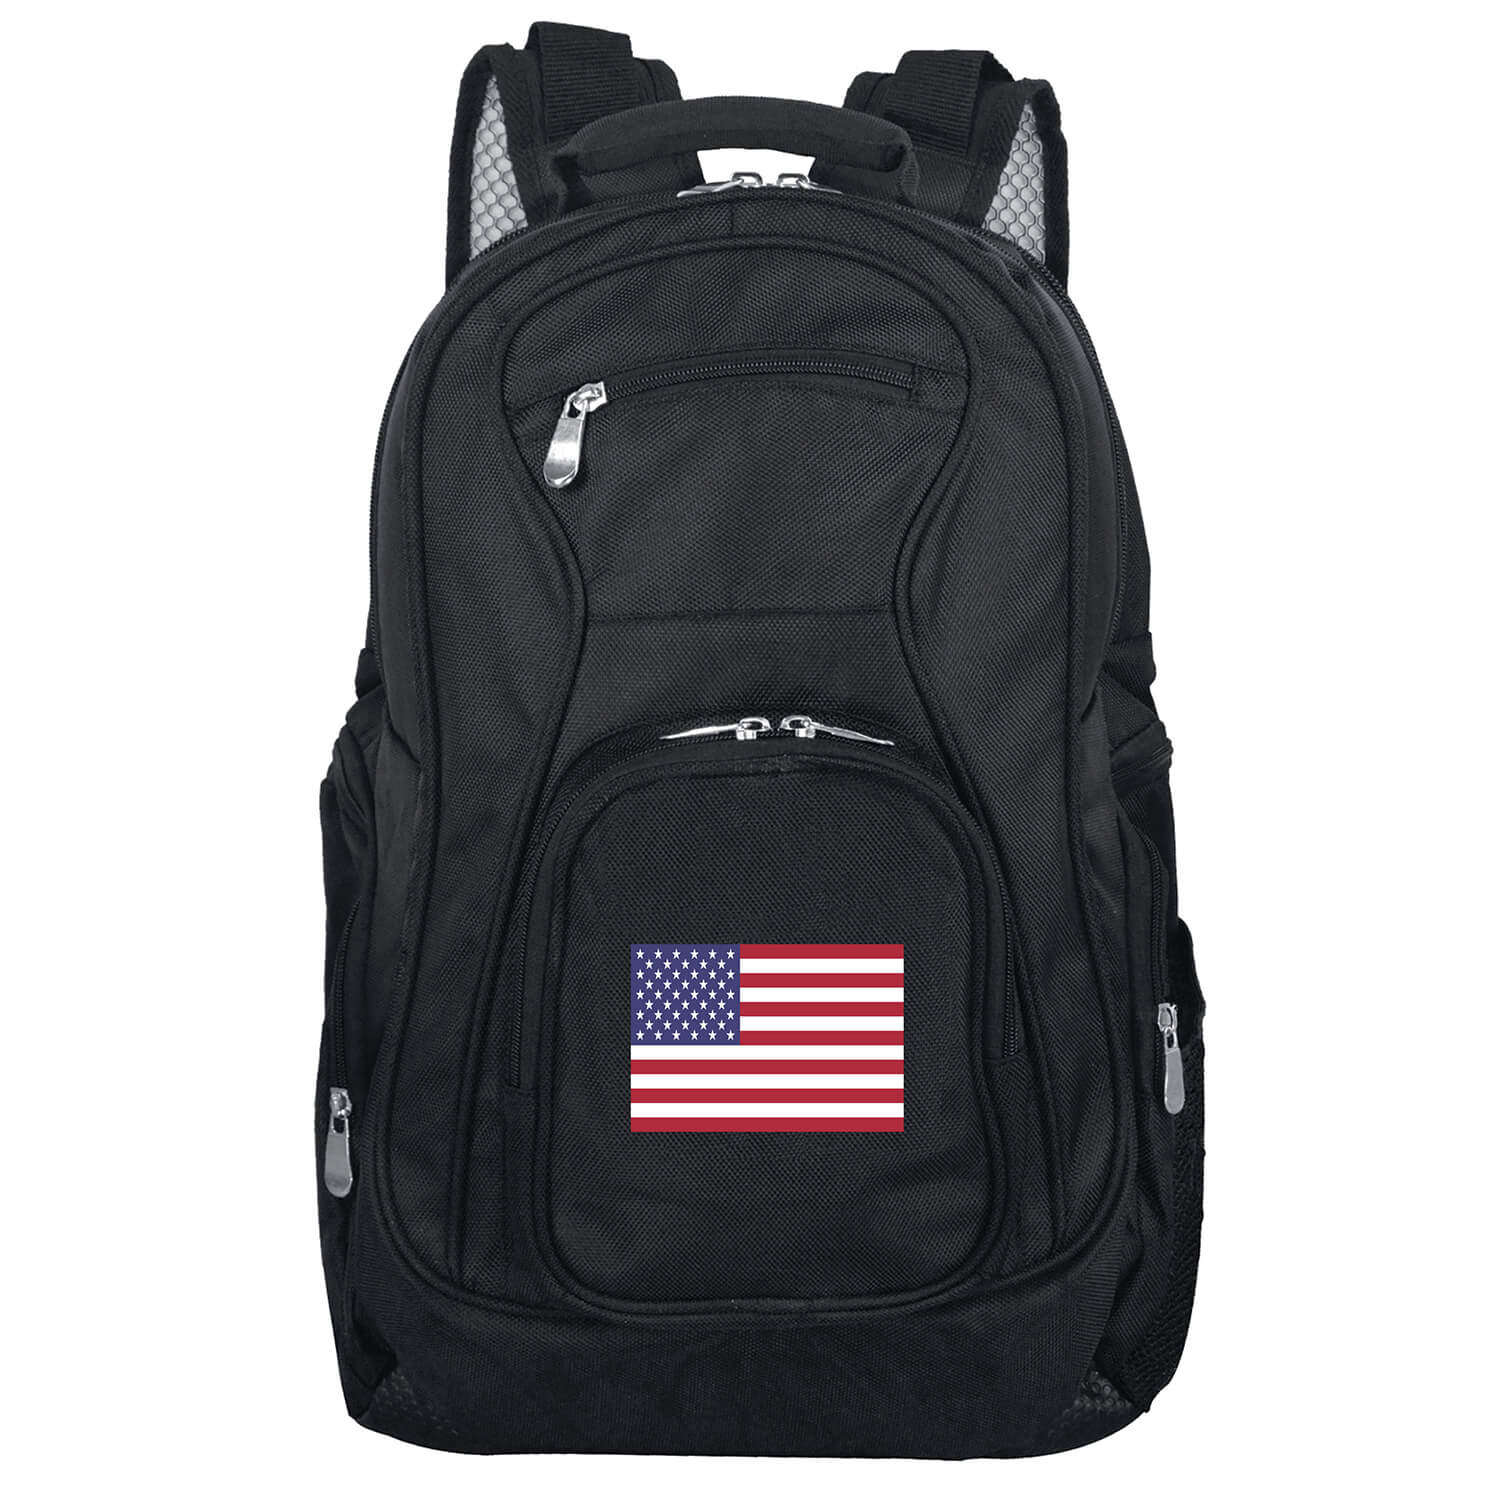 Team USA Premium Laptop Backpack - Fits Most 17 Inch Laptops and Tablets - Ideal for Work, Travel, School, College, and Commuting